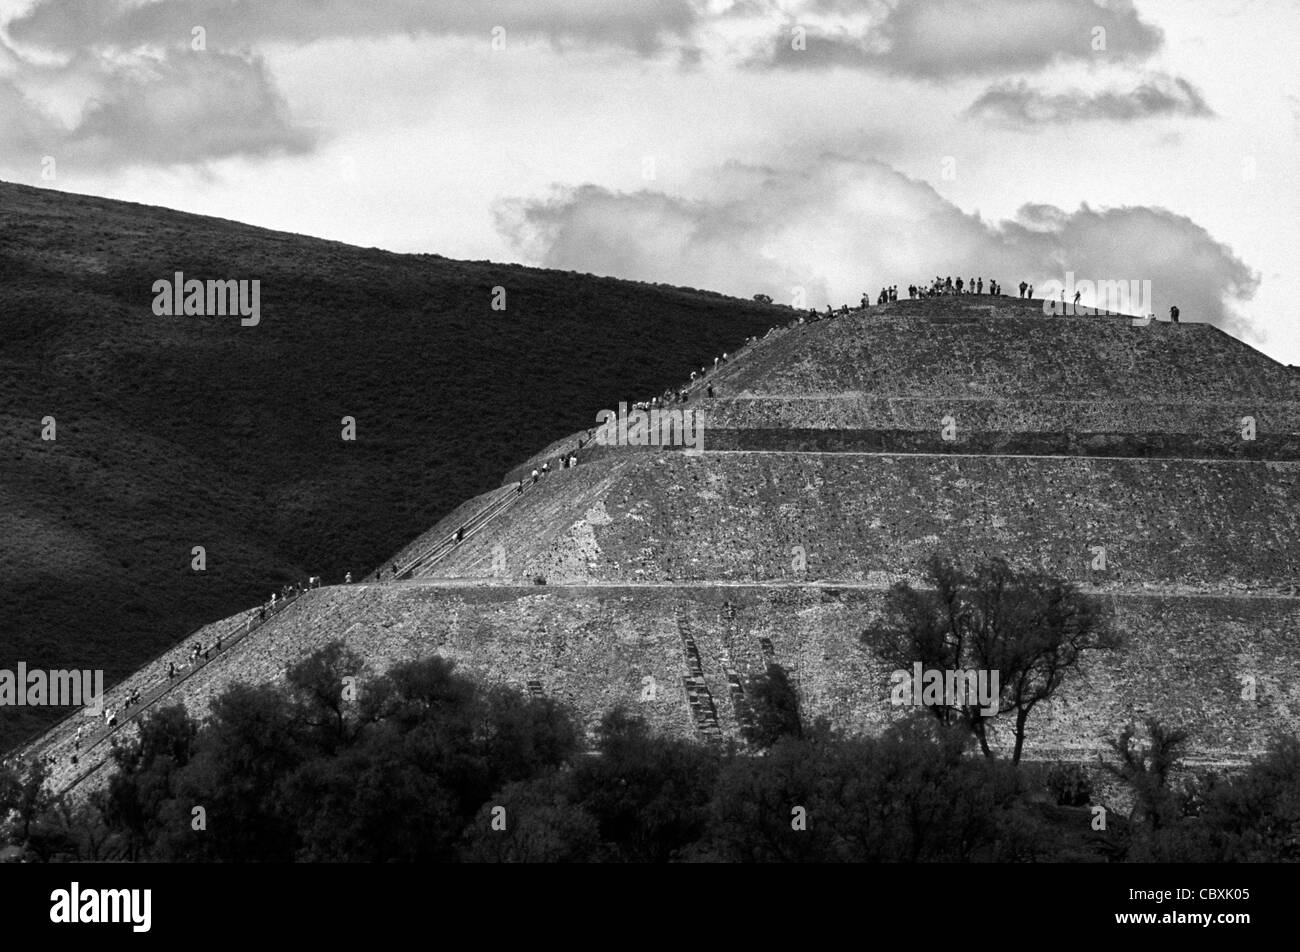 Black and white photograph (infrared effect) of people climbing the Pyramid of the Sun, Teotihuacan, Mexico Stock Photo